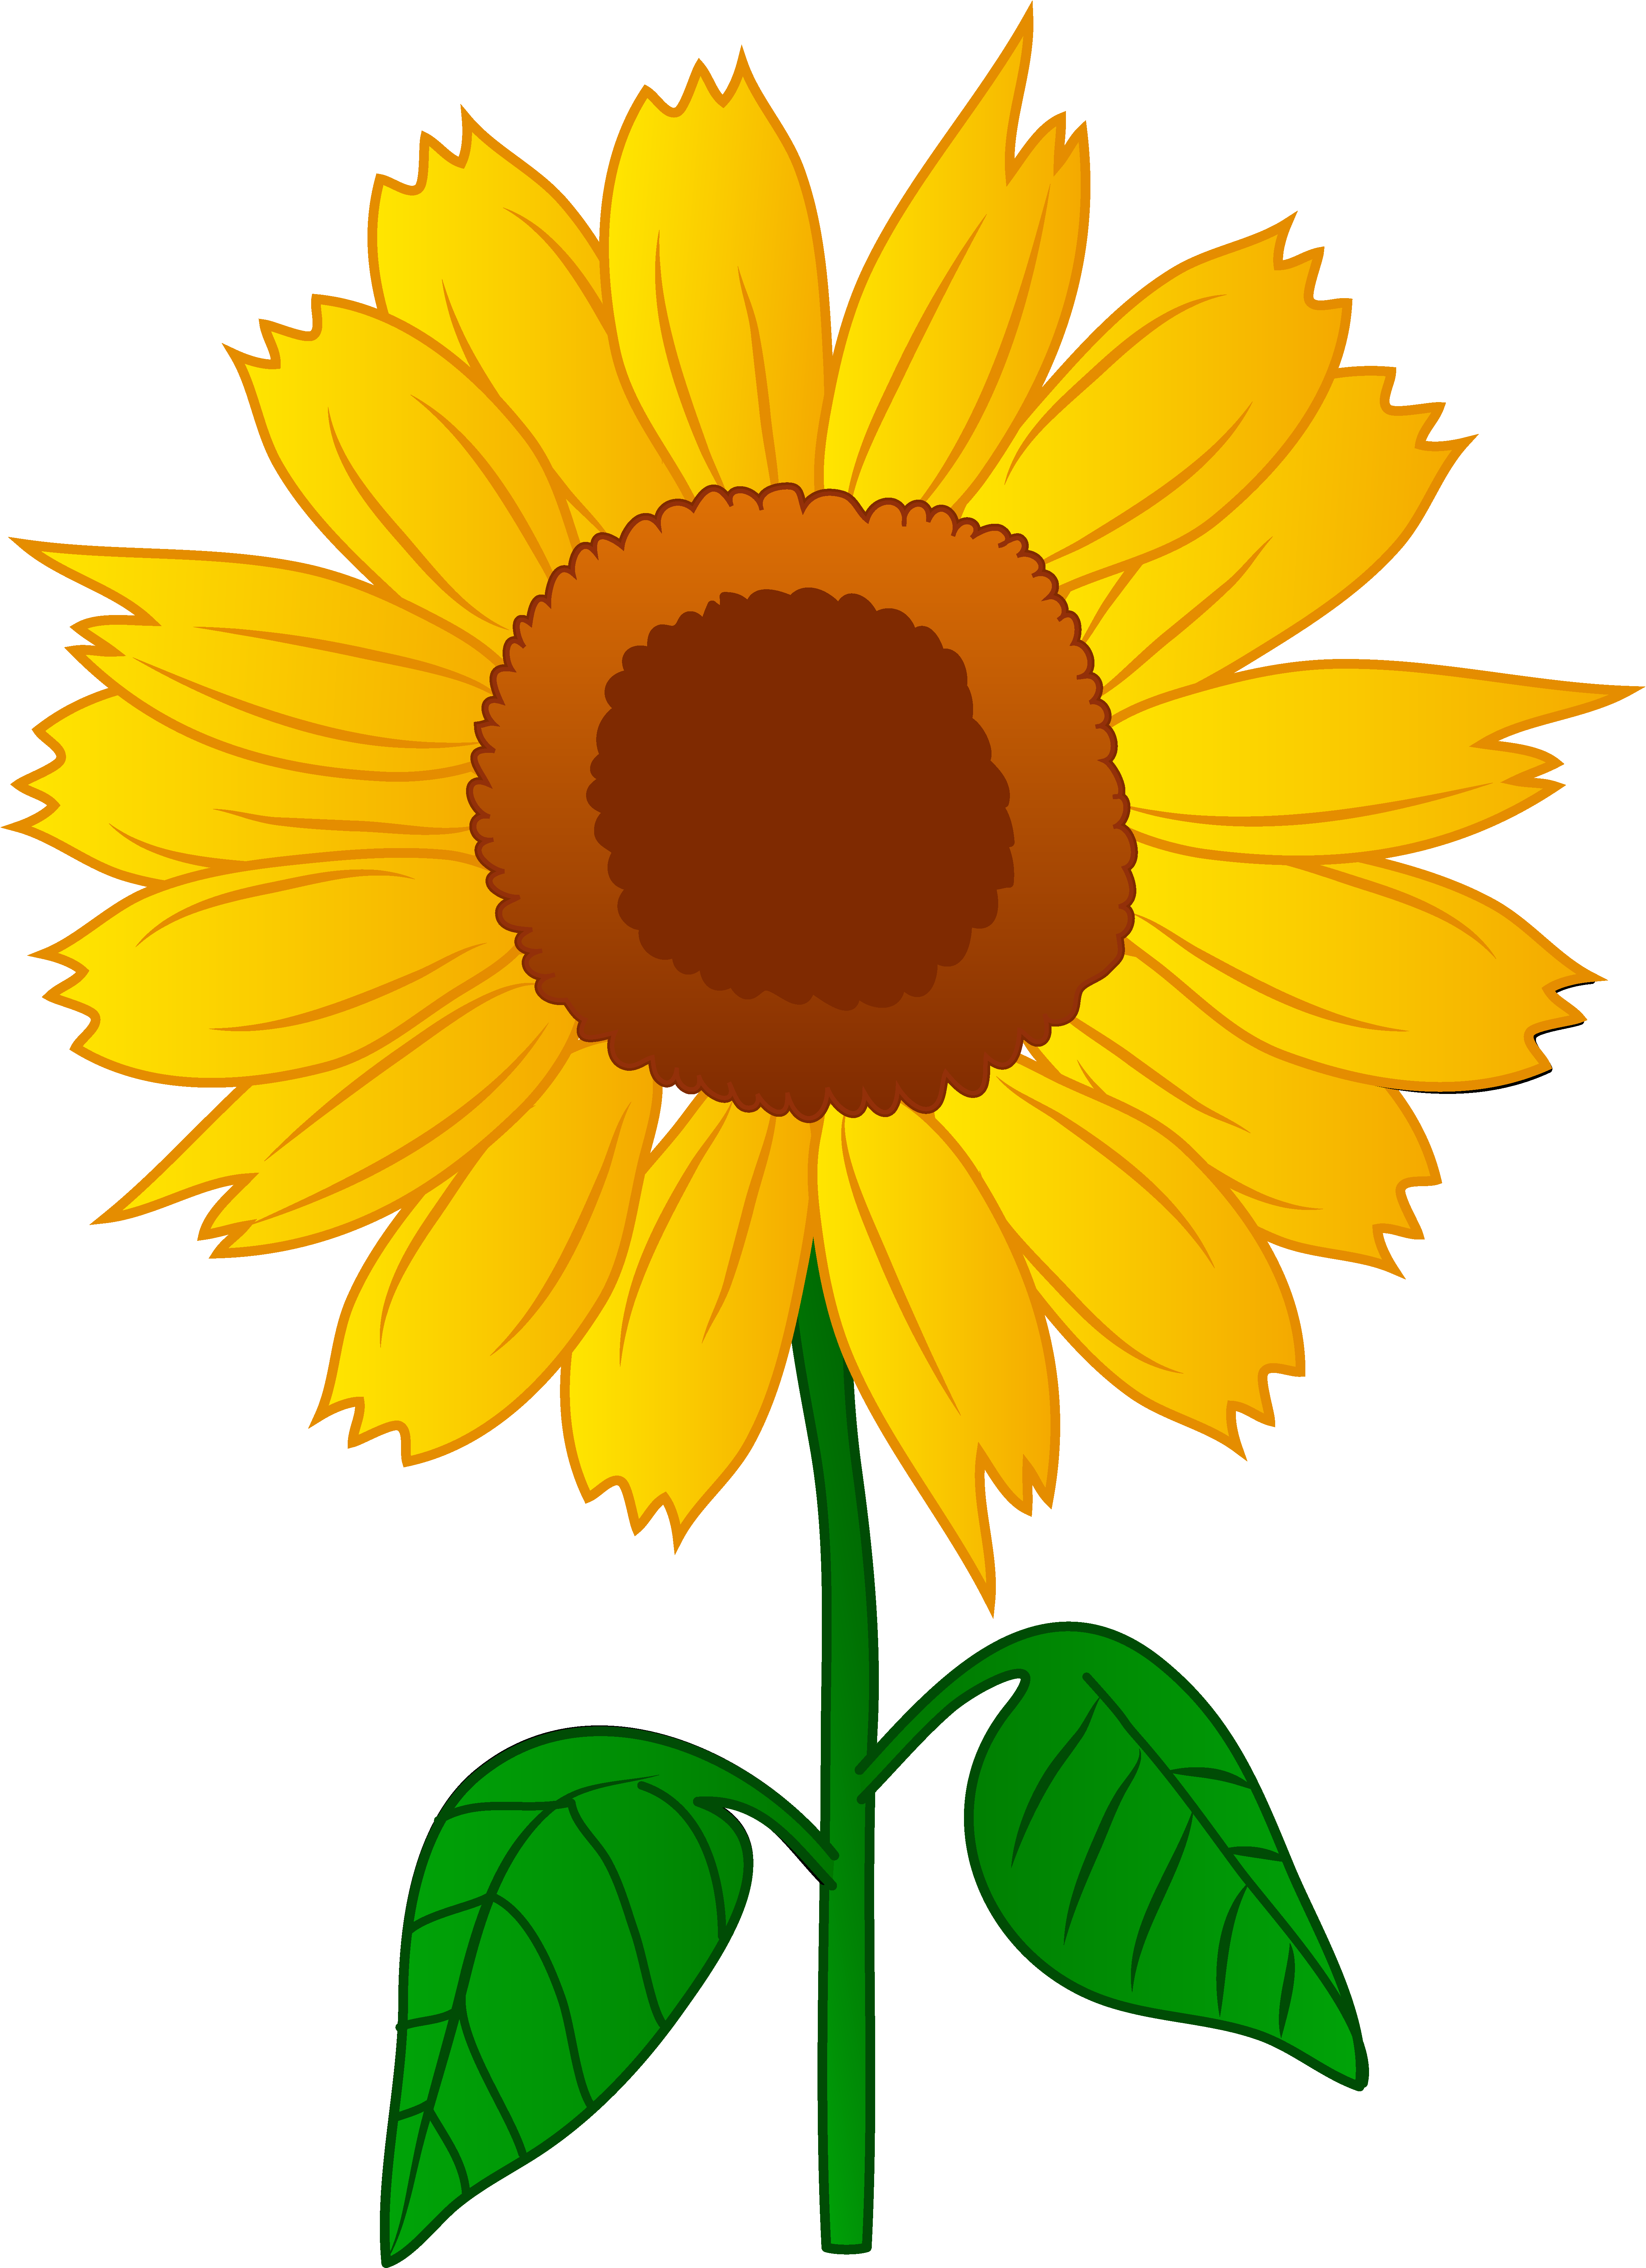 Sunflower Clip Art Free Printable | Clipart Panda - Free Clipart Images